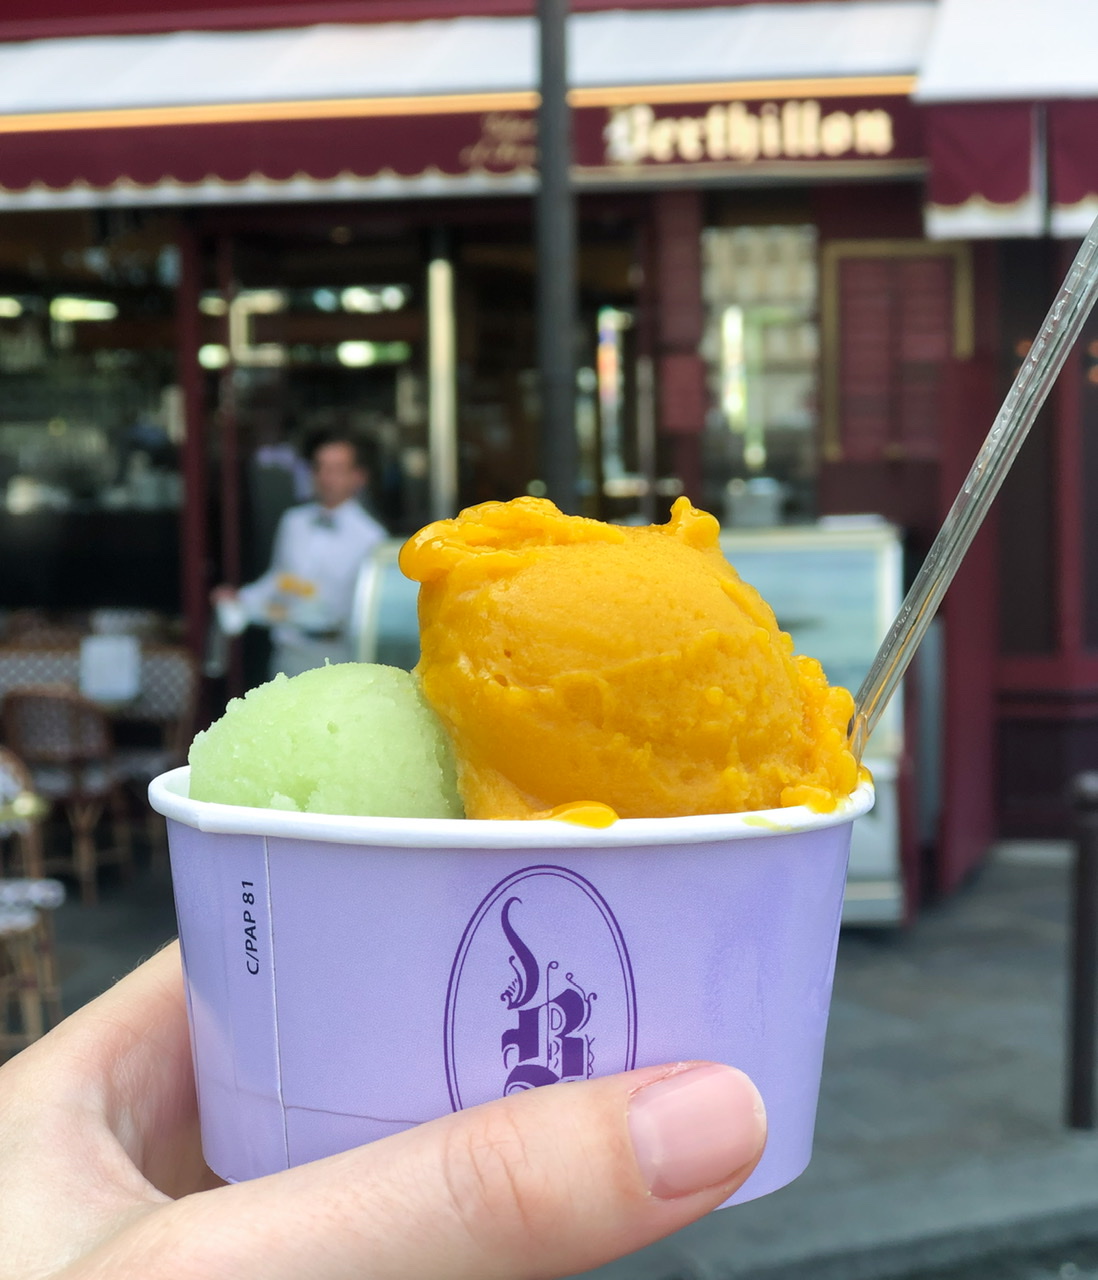 Scoops of mango and green apple sorbet in a purple cup held in hand in front of Berthillon store front